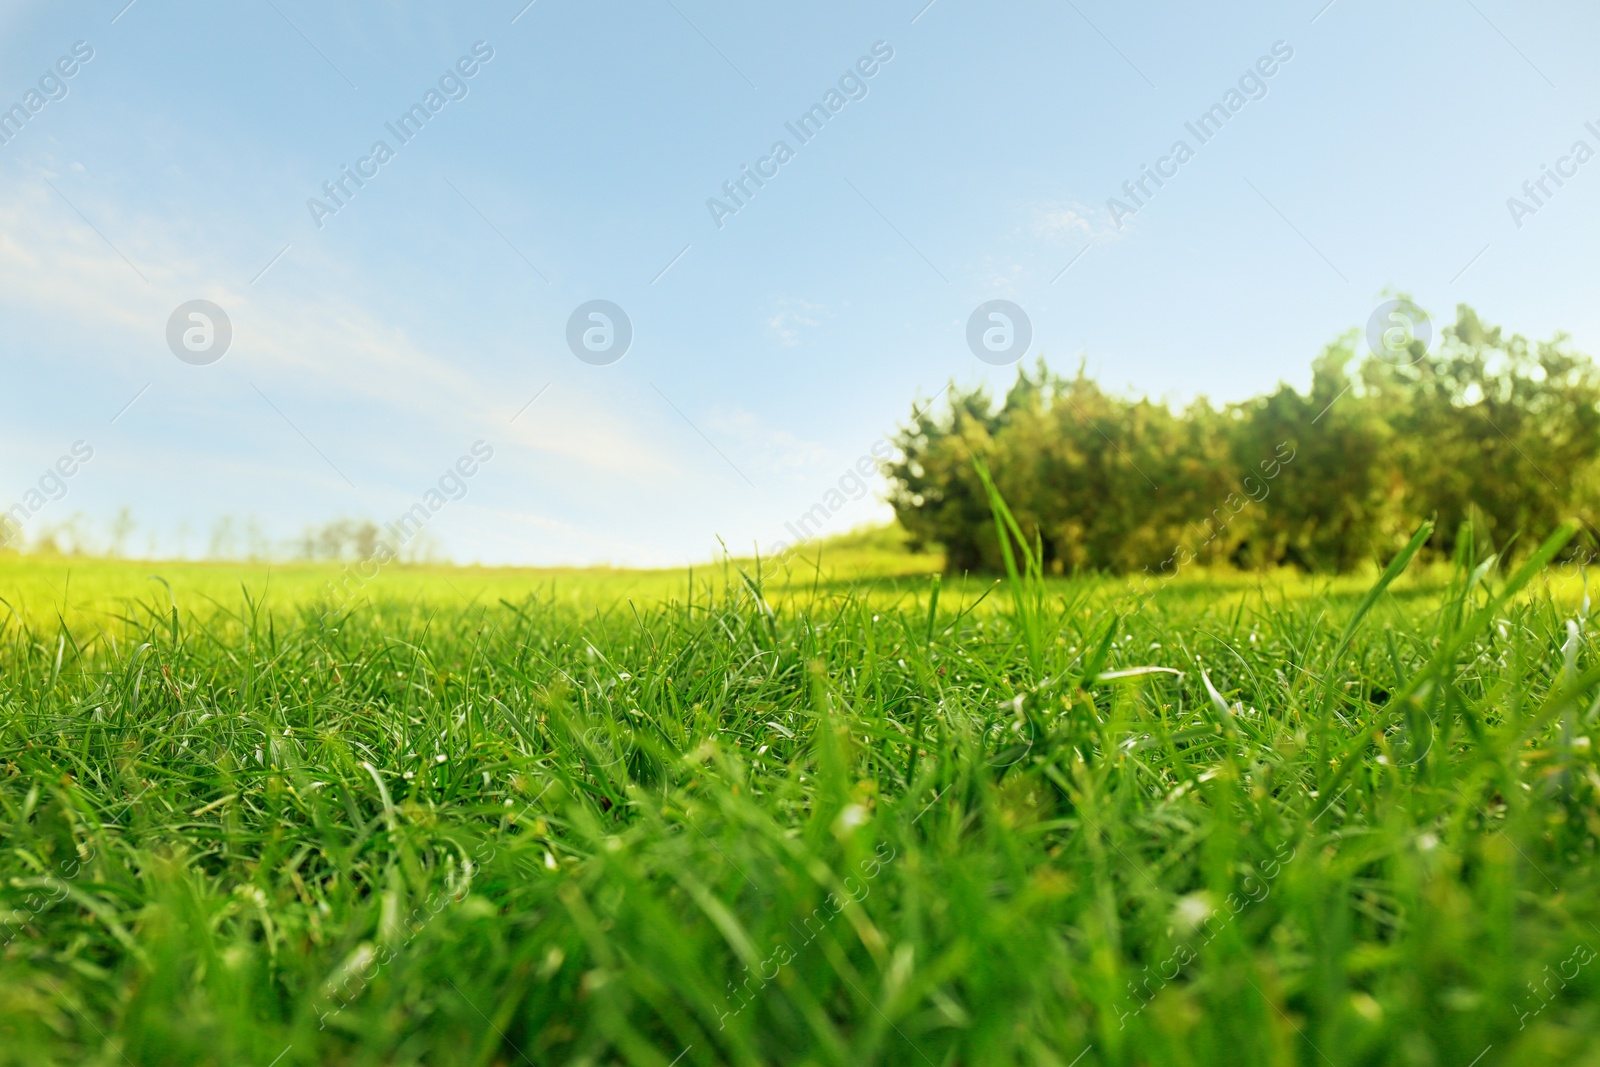 Photo of Picturesque landscape with beautiful green lawn on sunny day